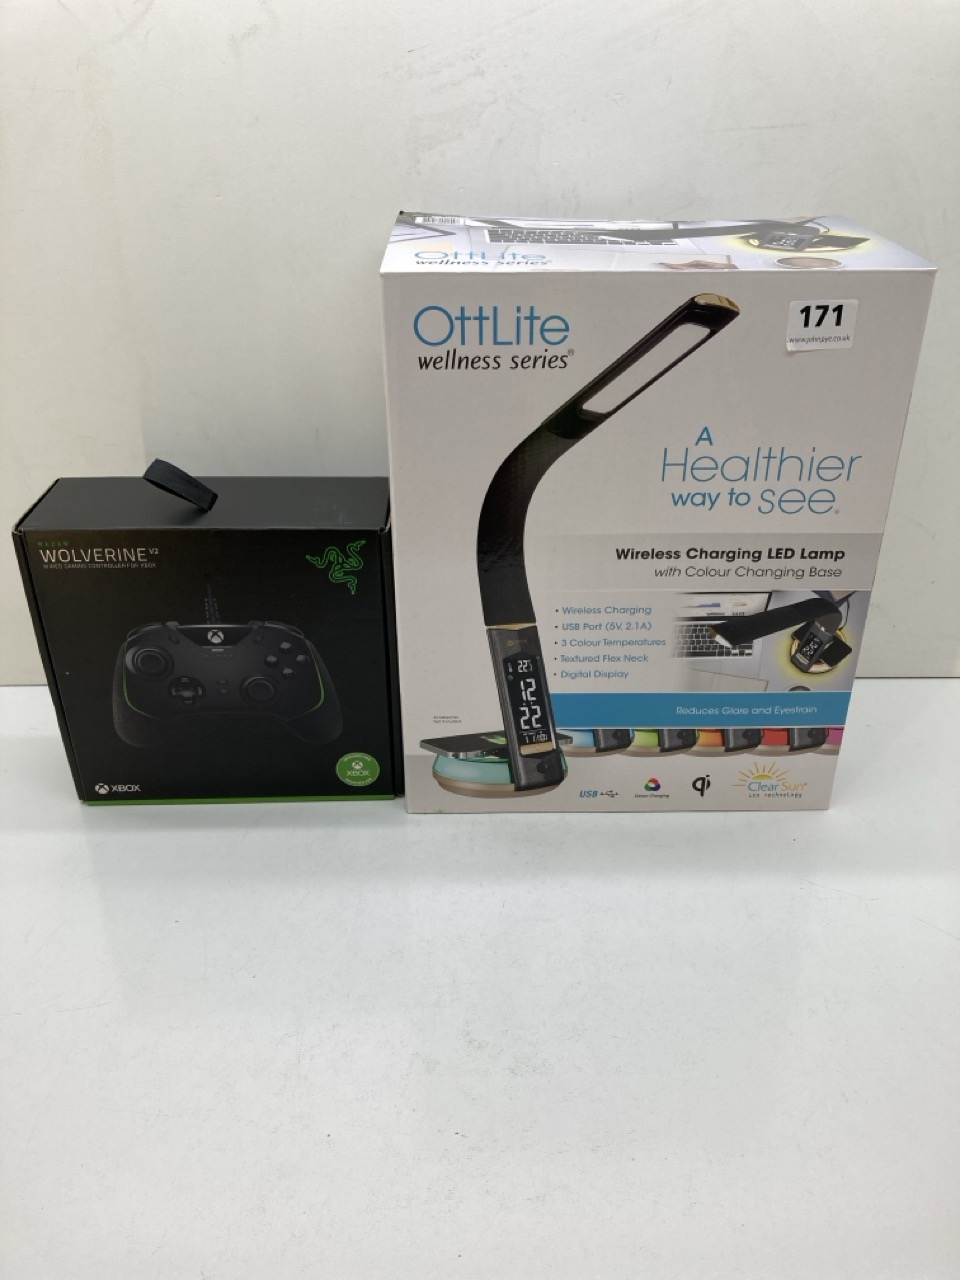 A OTTLITE WELLNESS SERIES WIRELESS CHARGING LED LAMP TOGETHER WITH A XBOX WOLVERINE WIRED GAMING CONTROLLER